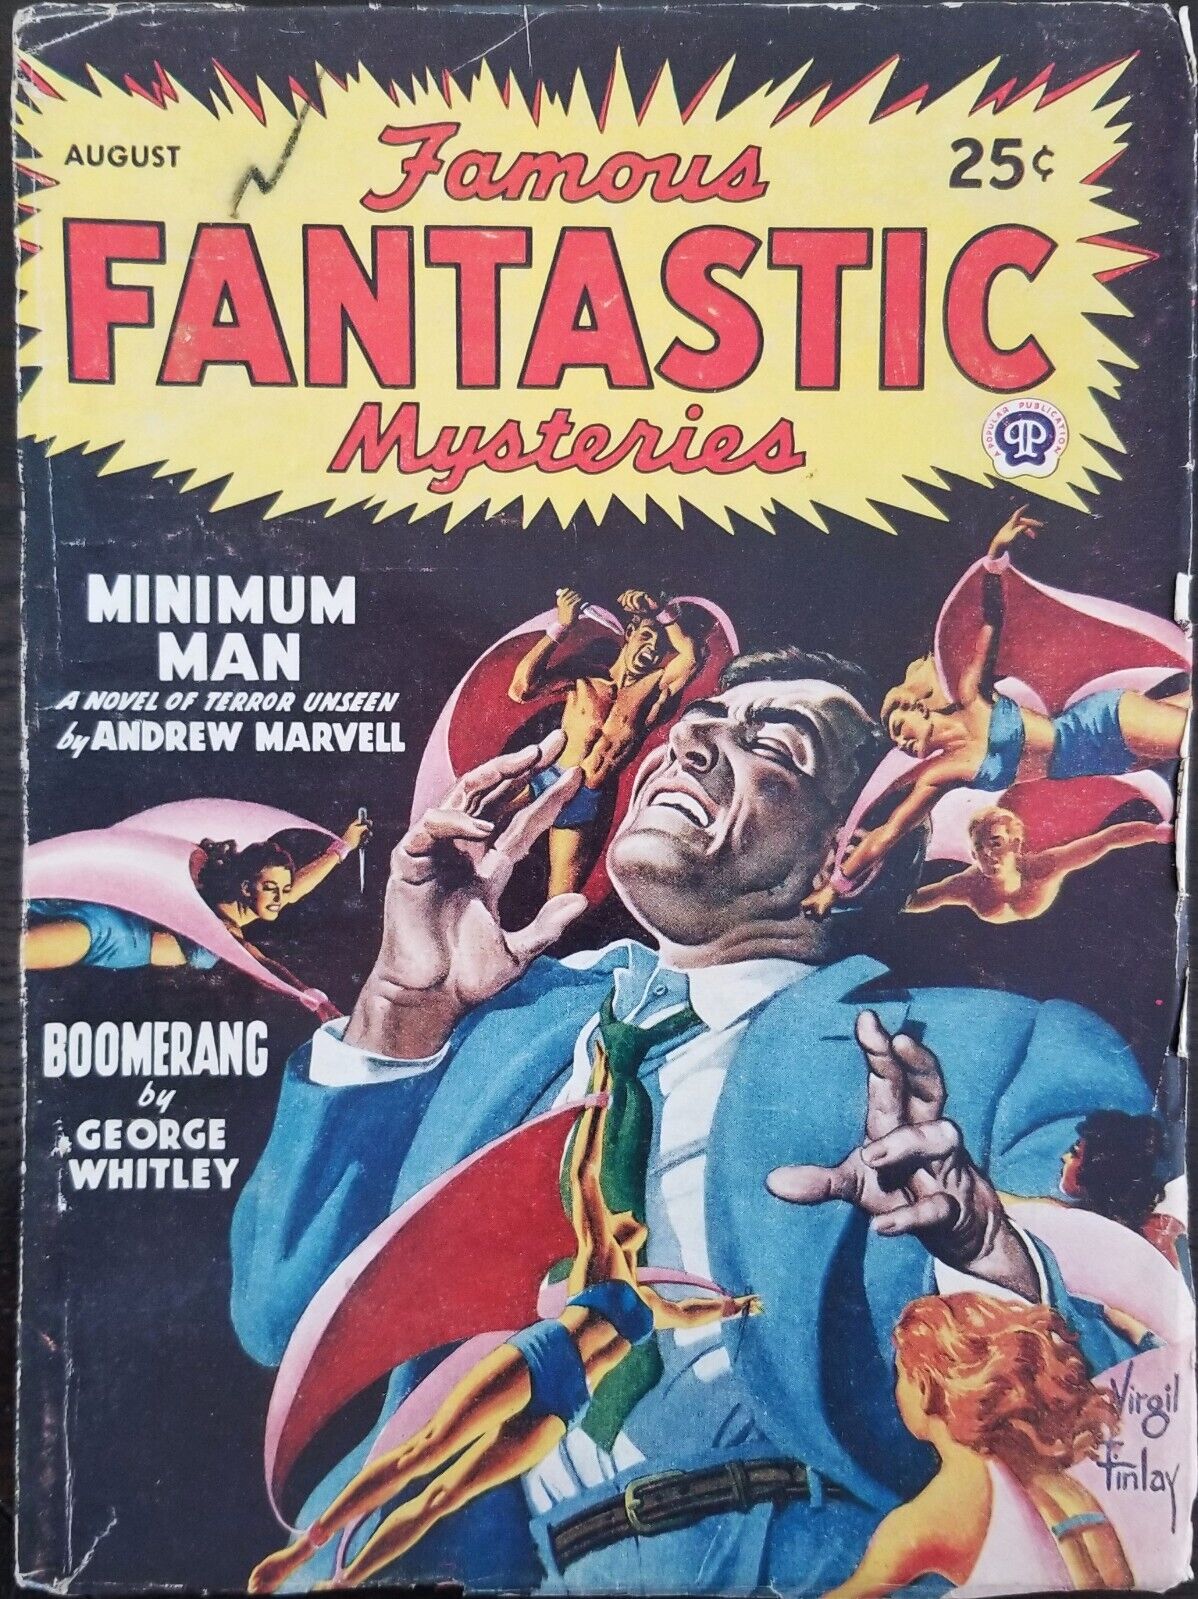 FAMOUS FANTASTIC MYSTERIES - AUGUST 1947 - VIRGIL FINLEY COVER - NICE CONDITION